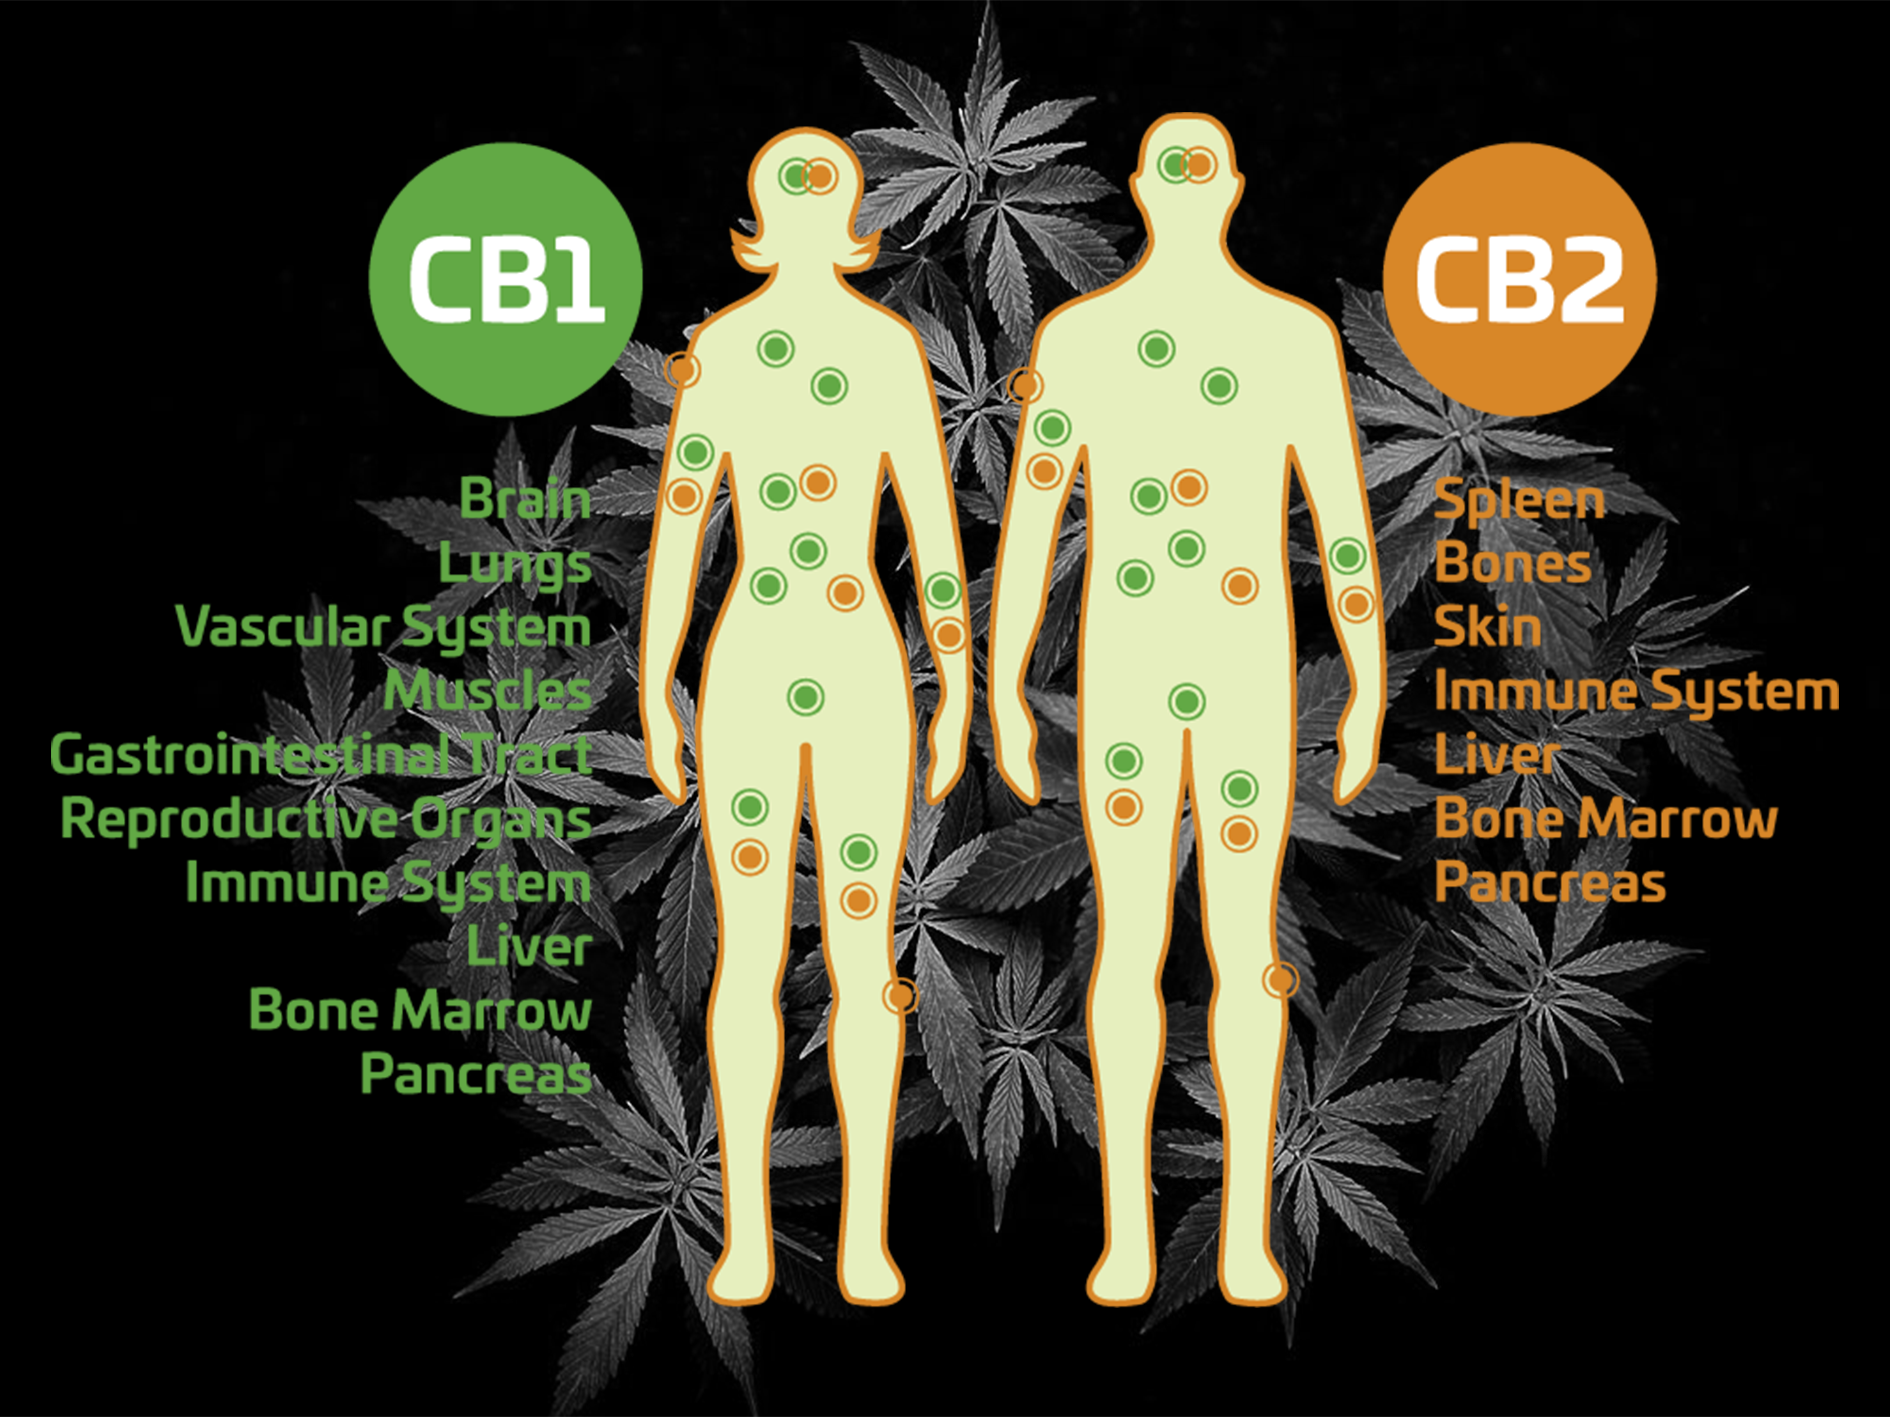 Cartoon of Endocannabinoid System with human bodies and CB1 and CB2 receptors on cannabis background